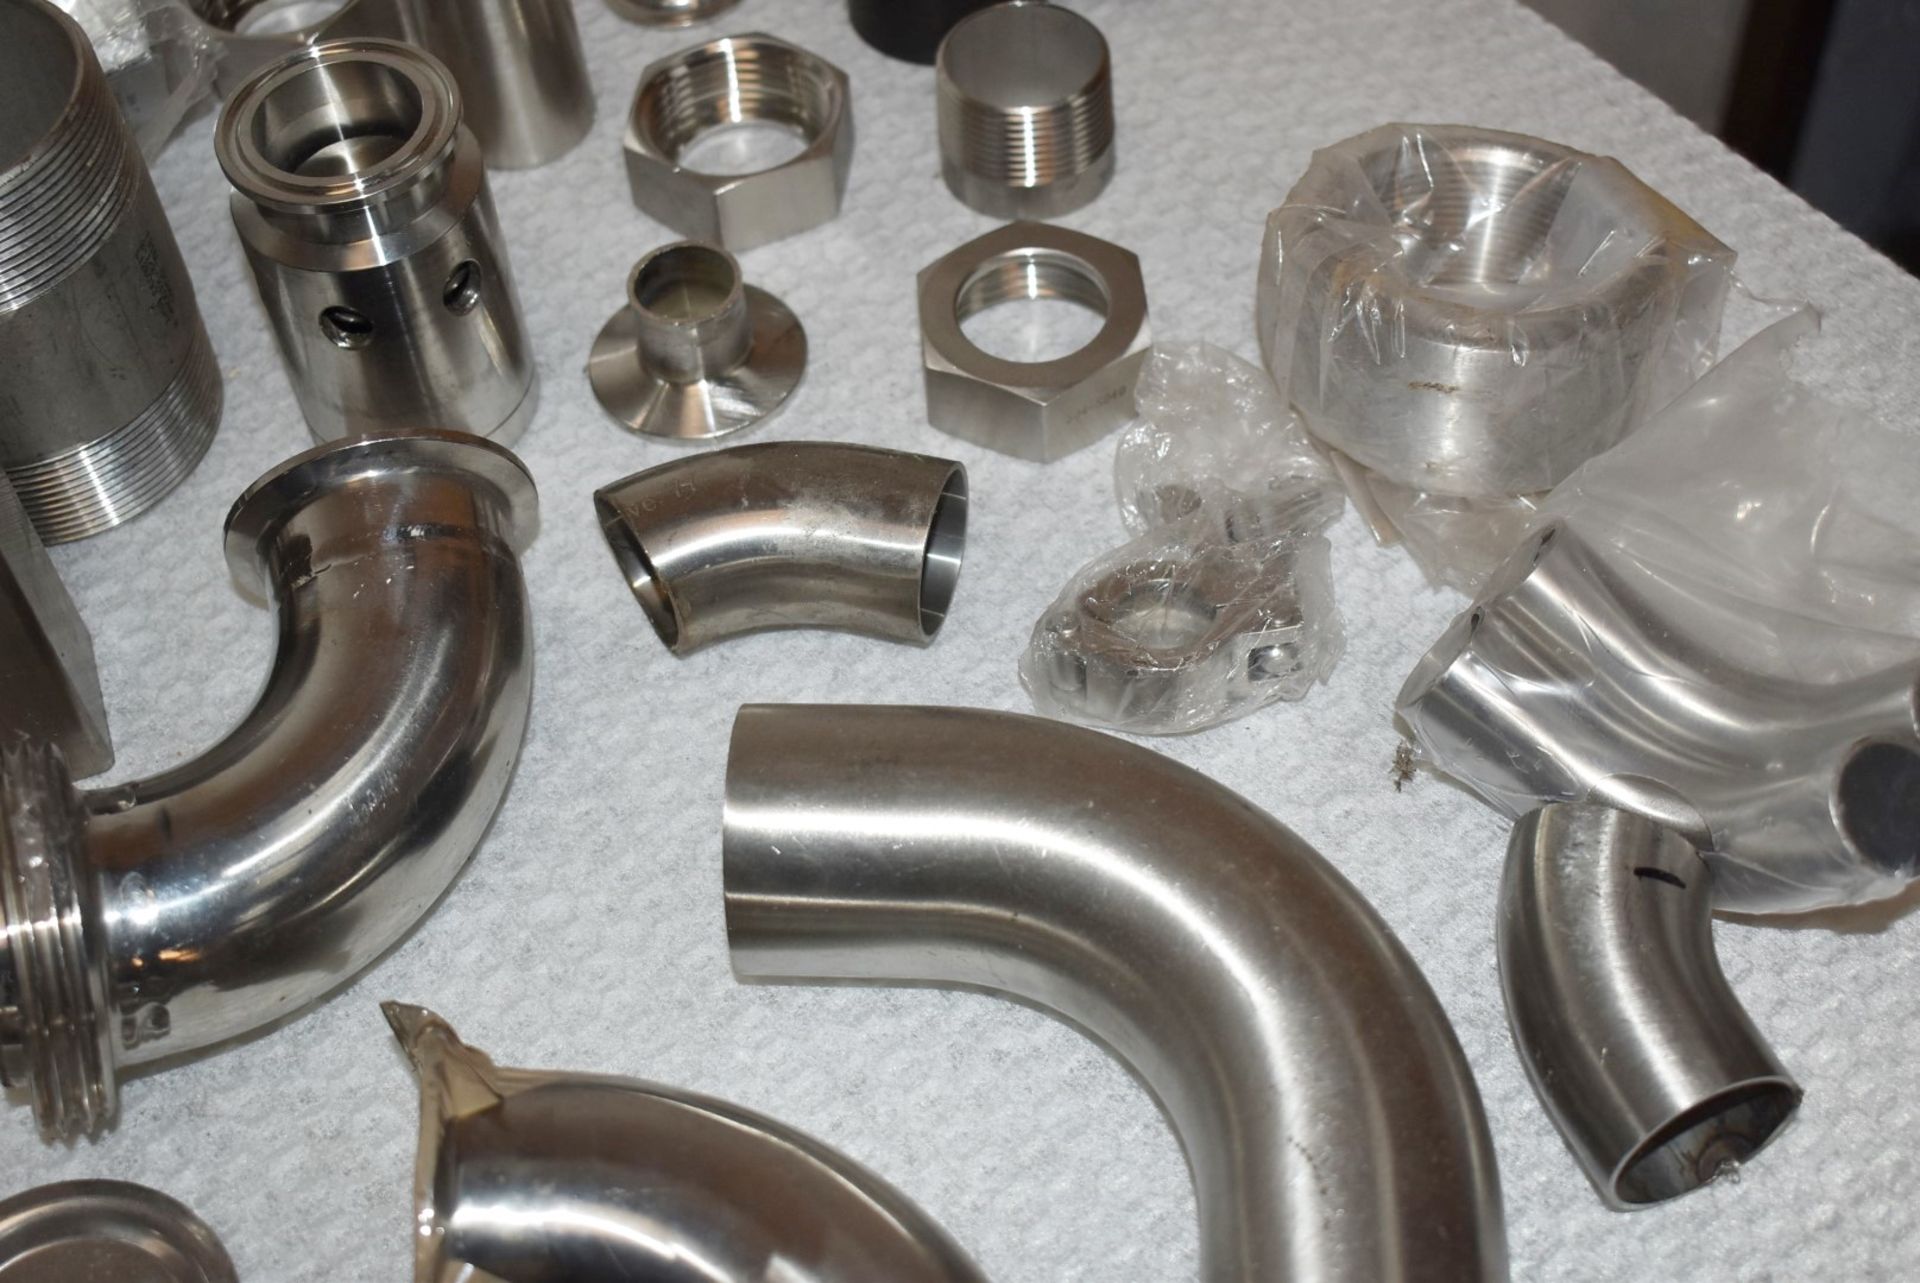 Assorted Job Lot of Stainless Steel Fittings For Brewery Equipment - Includes Approx 60 Pieces - - Image 12 of 17